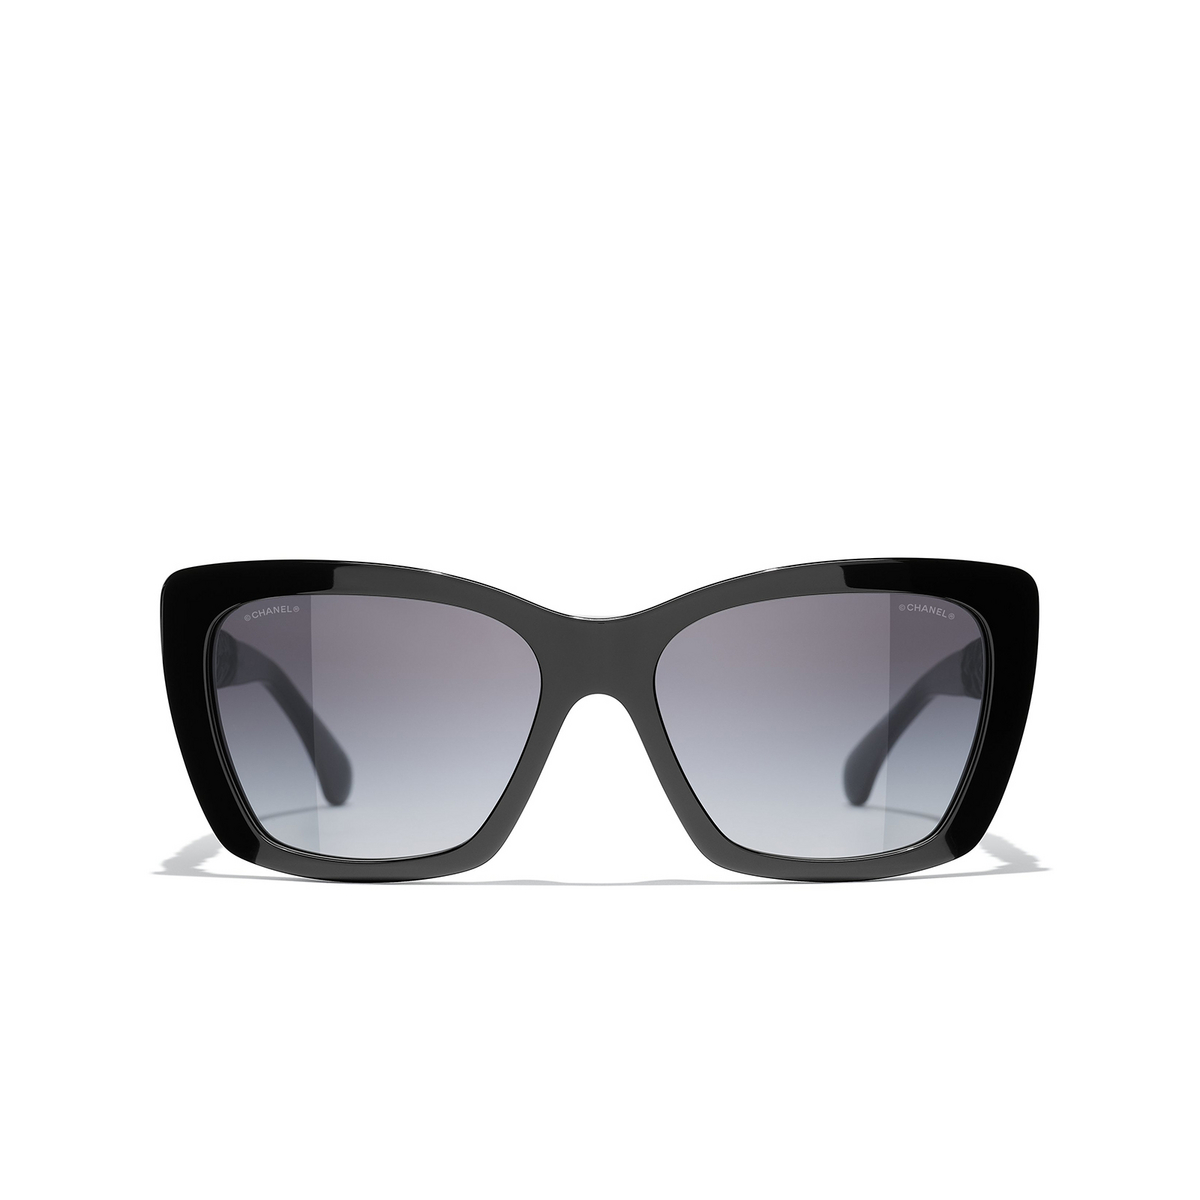 CHANEL butterfly Sunglasses C501S6 Black & White - front view